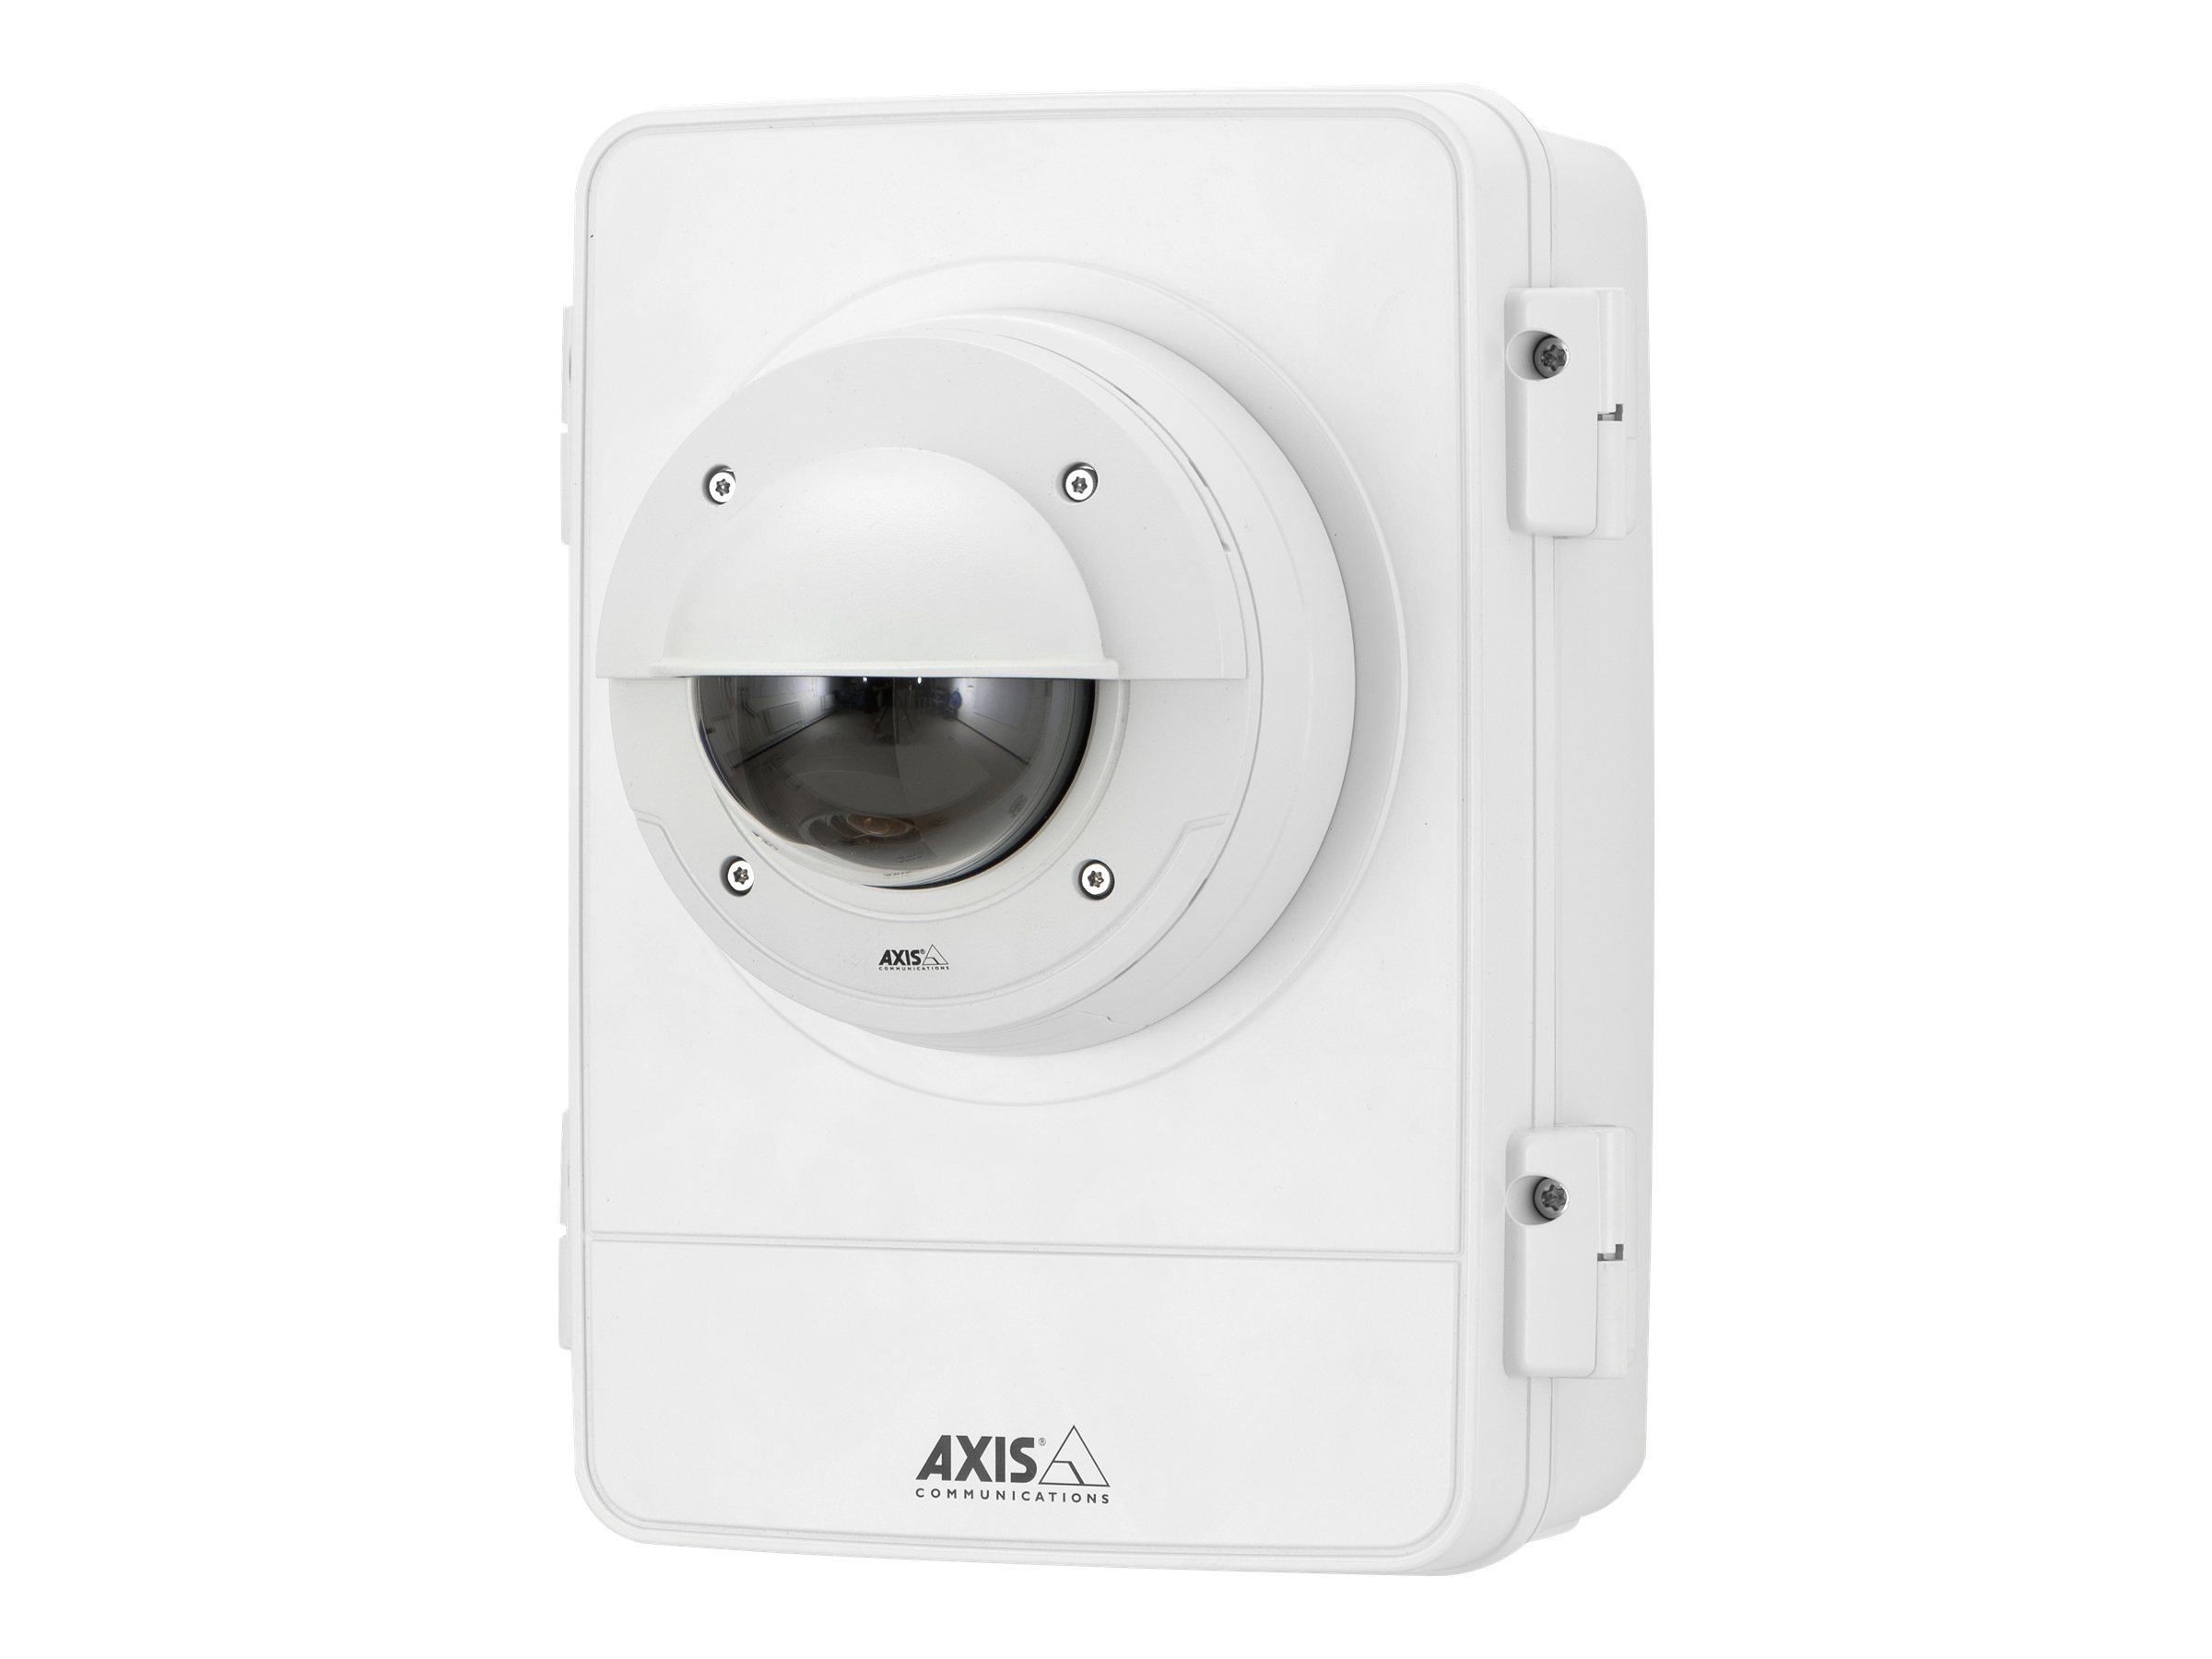 AXIS T98A17-VE SURVEILLANCE CABINET IP66, IK10 and NEMA 4X rated outdoor-ready surveillance cabinet. Protects accessory devices such as power supply, media converter, midspan and fuse from tough weather and vandalism. The camera is mounted on the door of 